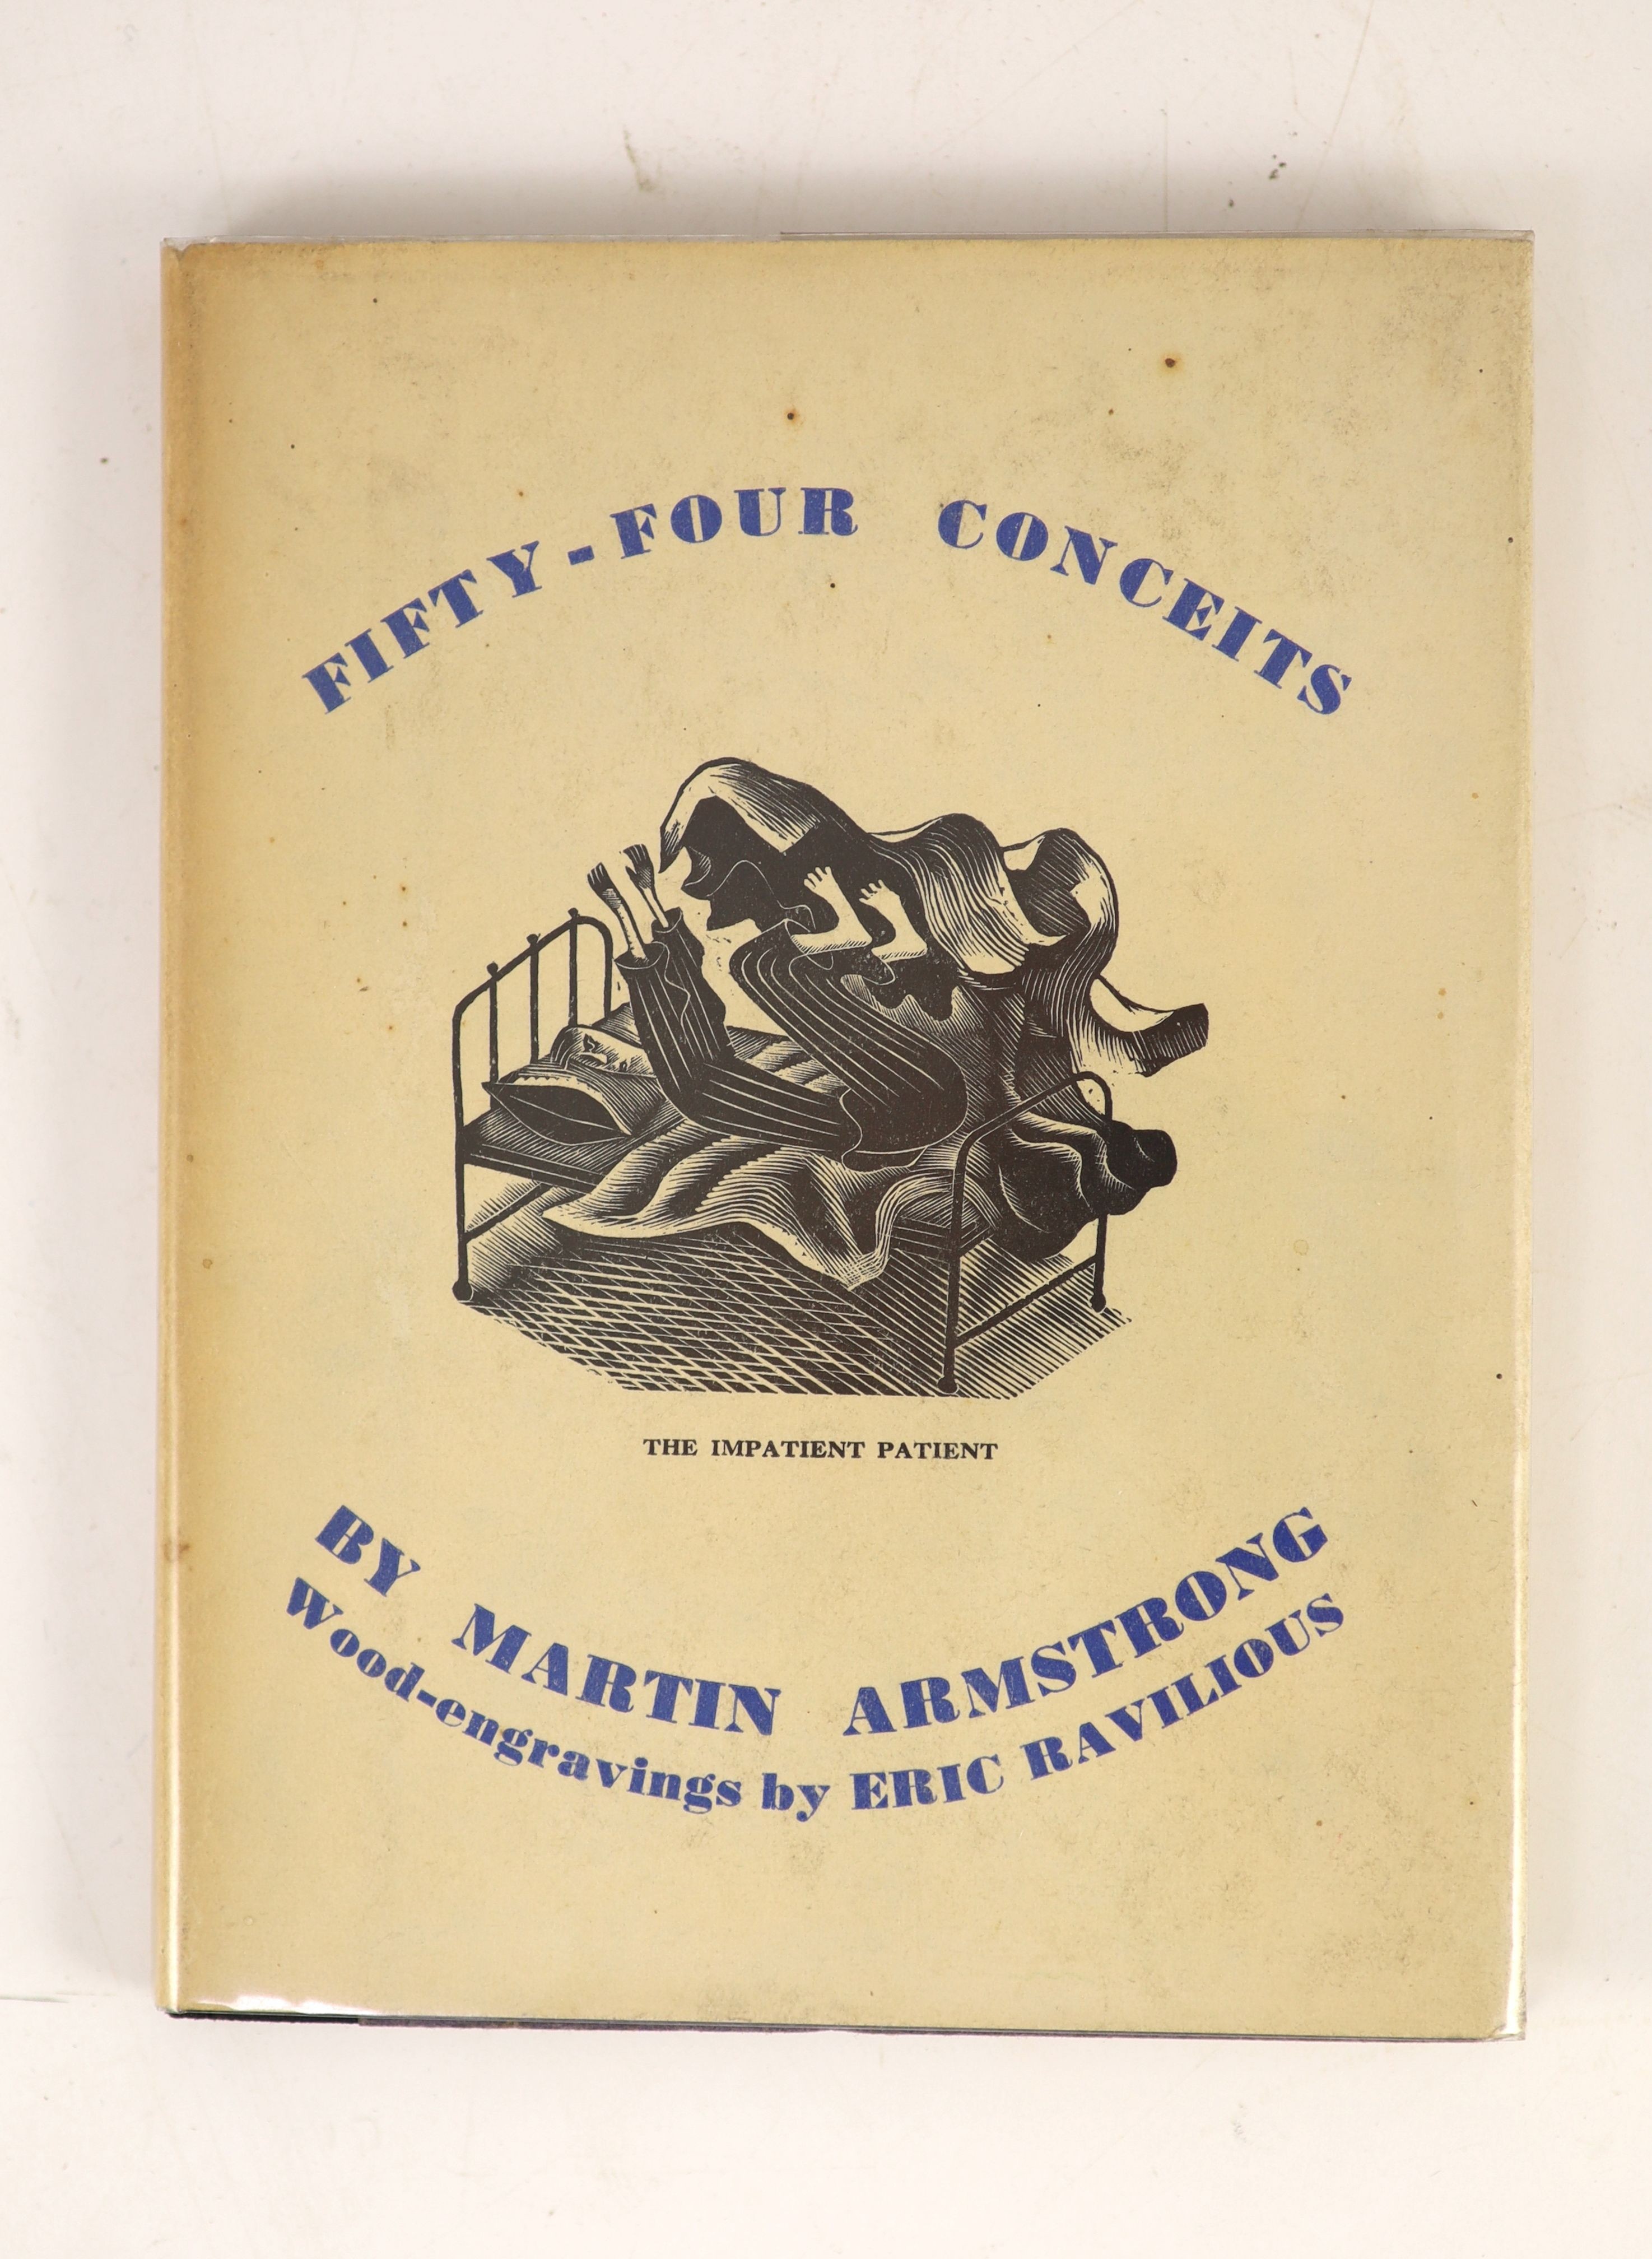 Armstrong, Martin - Fifty-Four Conceits, illustrated by Eric Ravilious, 12mo, with unclipped d/j, Martin Secker, London, 1933